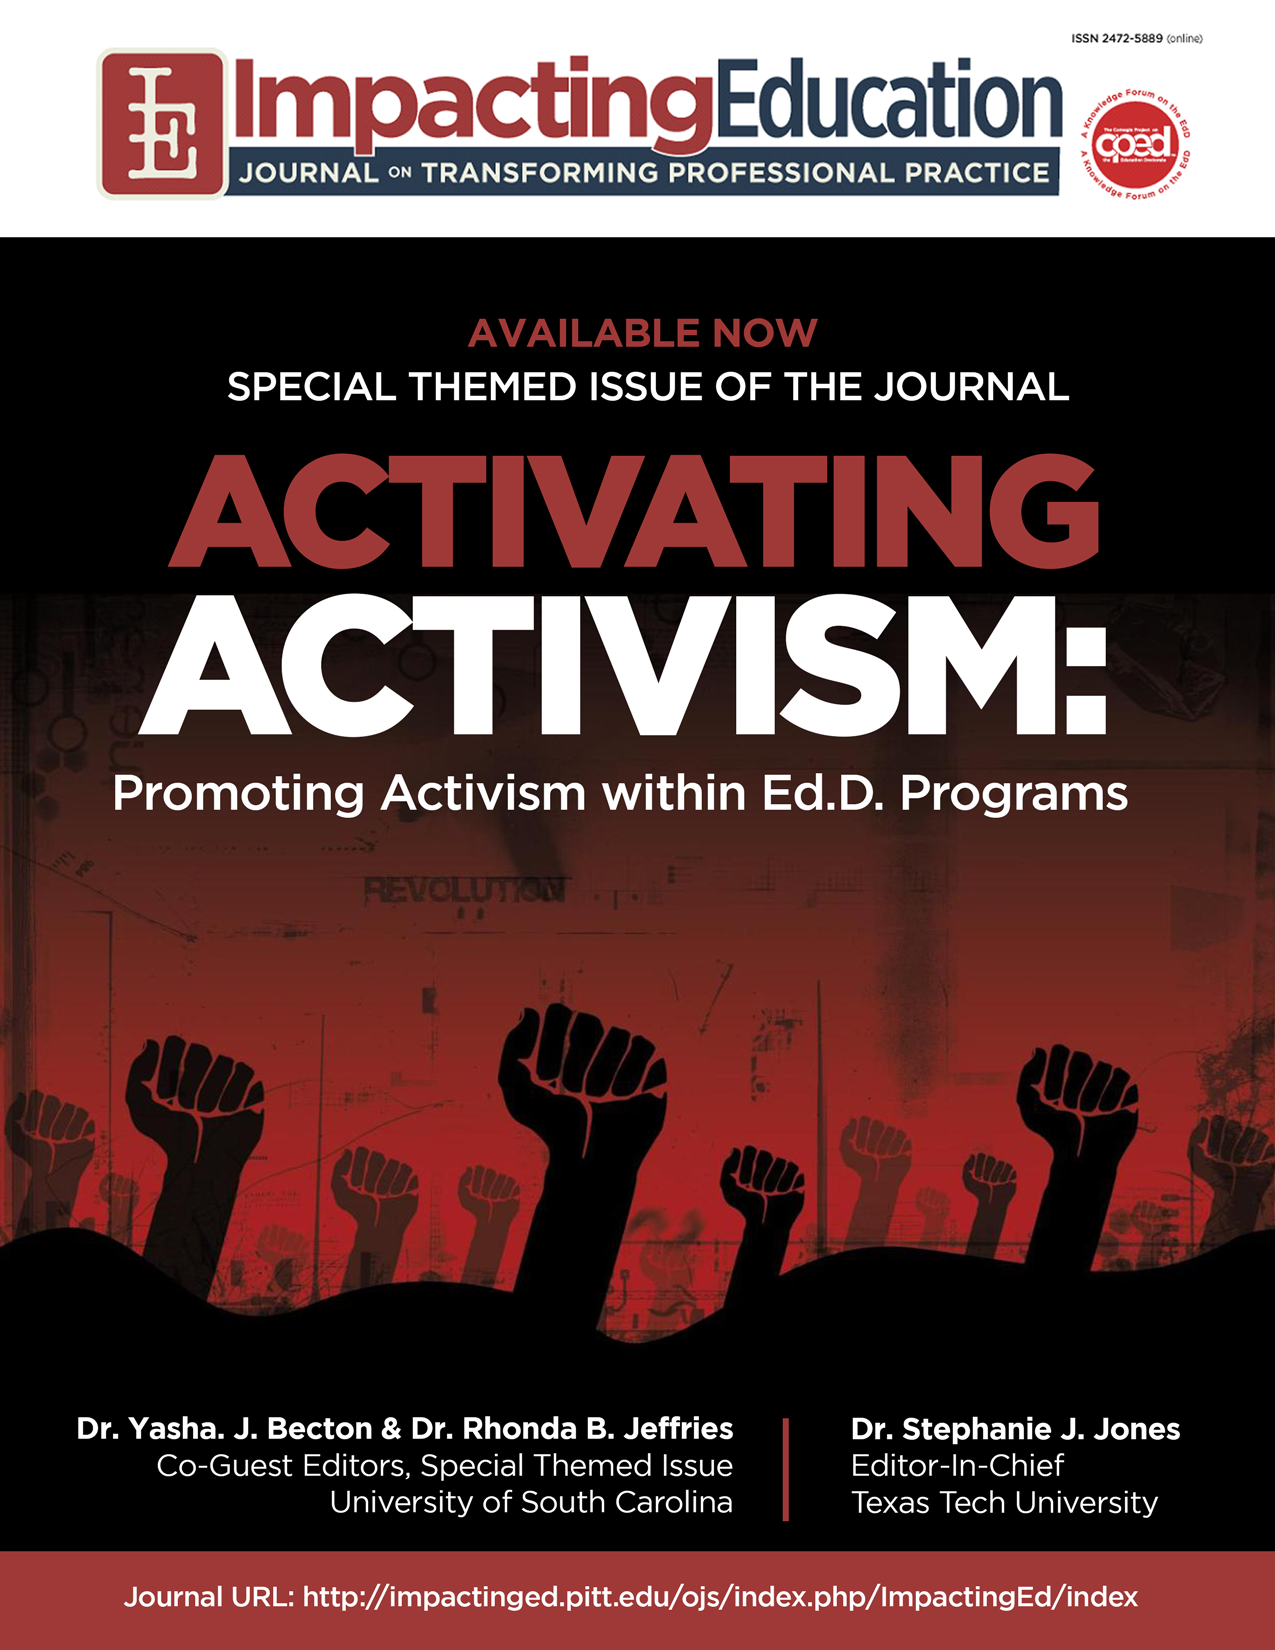 Impacting Education: Activating Activism: Promoting Activism within EdD Programs